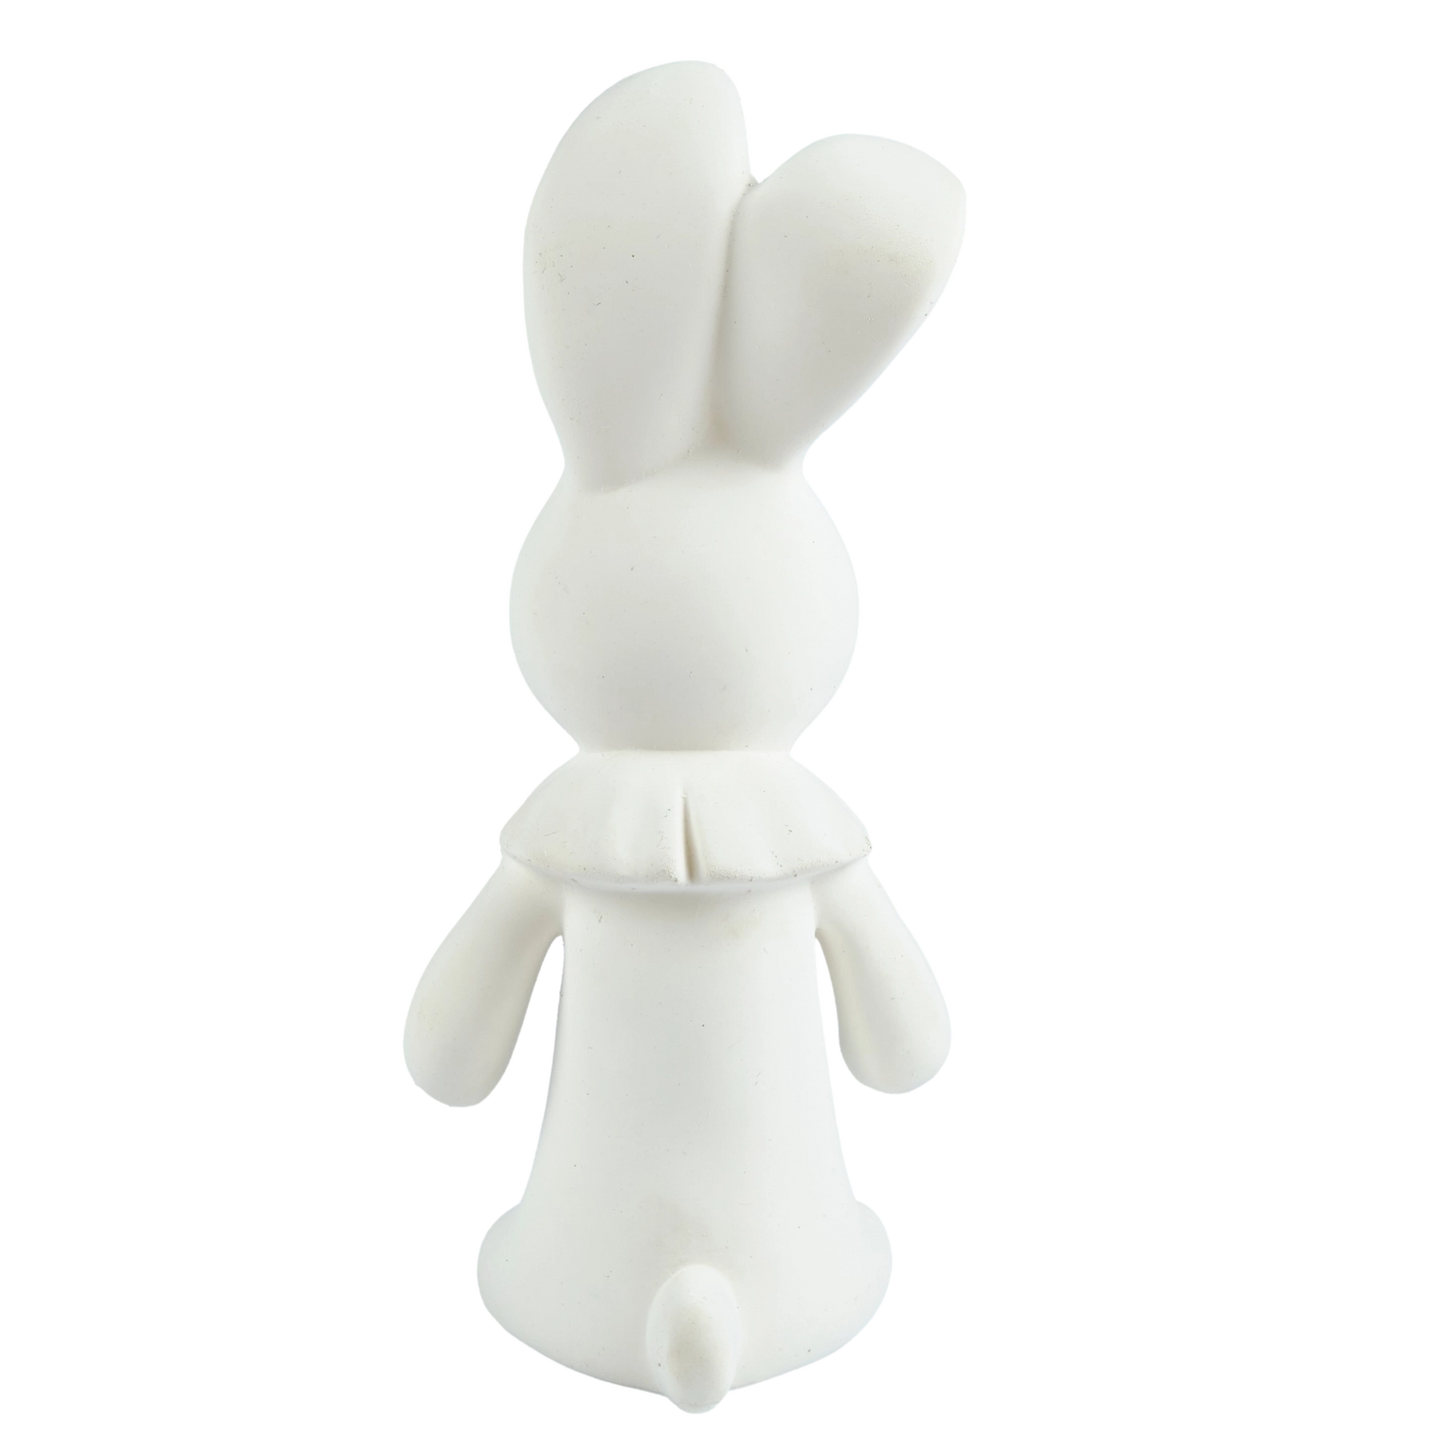 Havah Bunny Rubber Toy